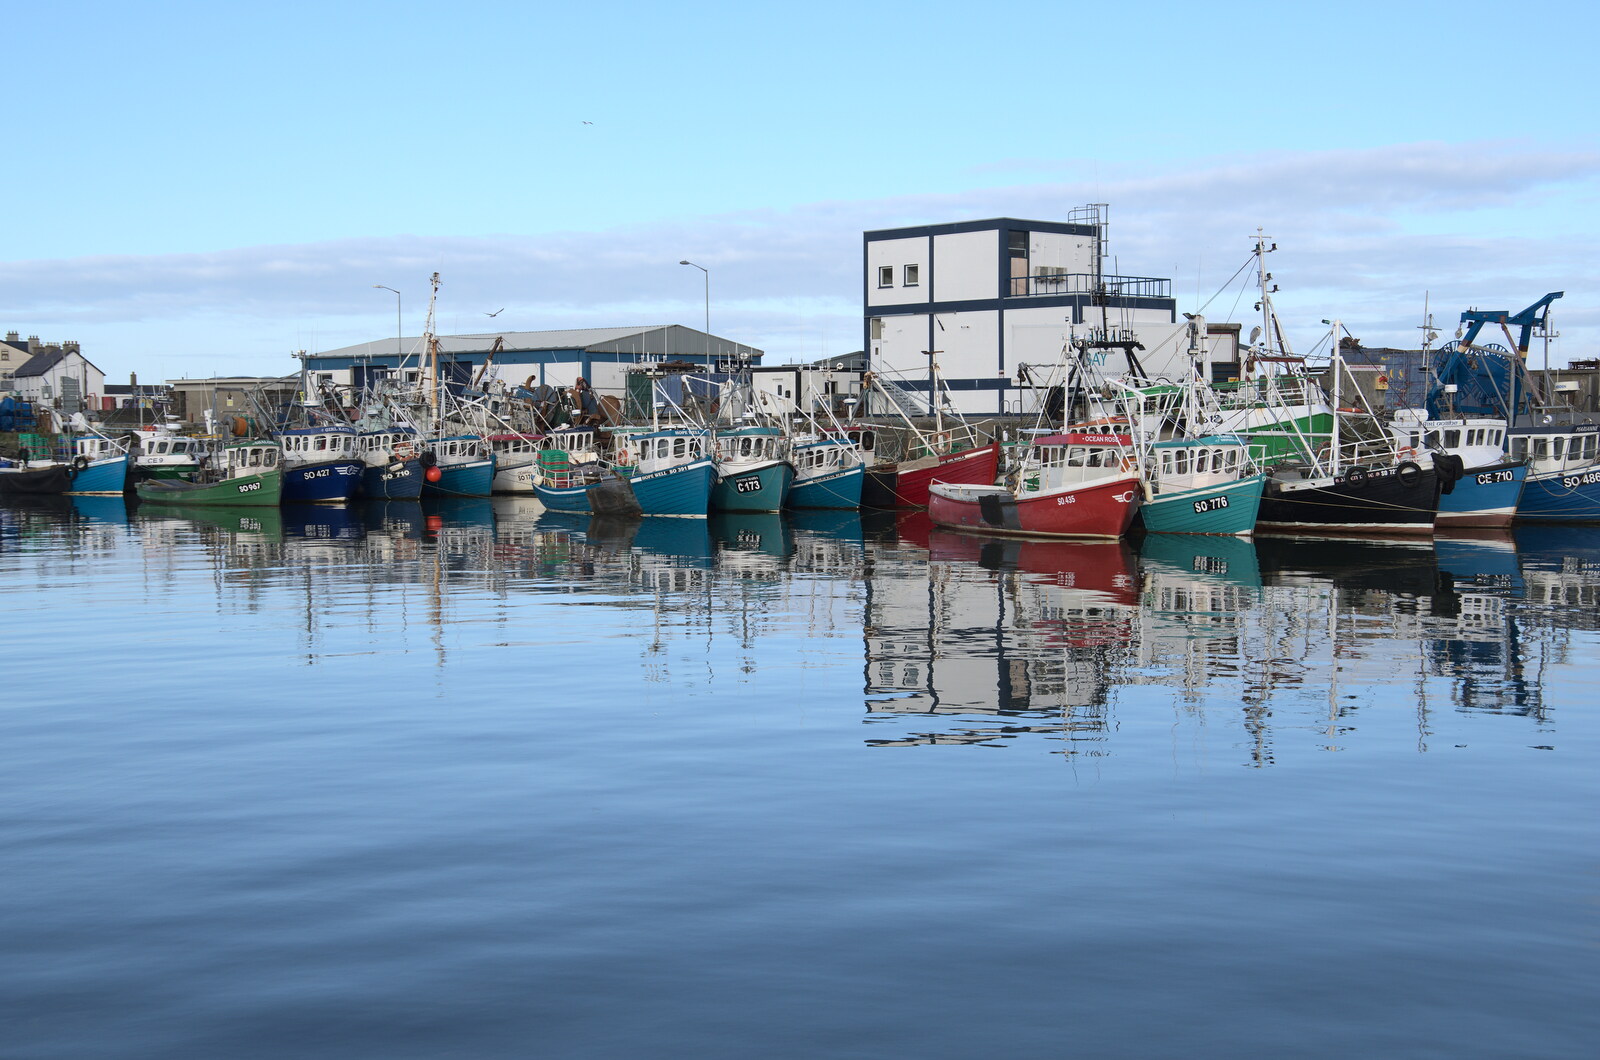 Greencastle, Doagh and Malin Head, County Donegal, Ireland - 19th April 2022: Colourful fishing boats in the harbour